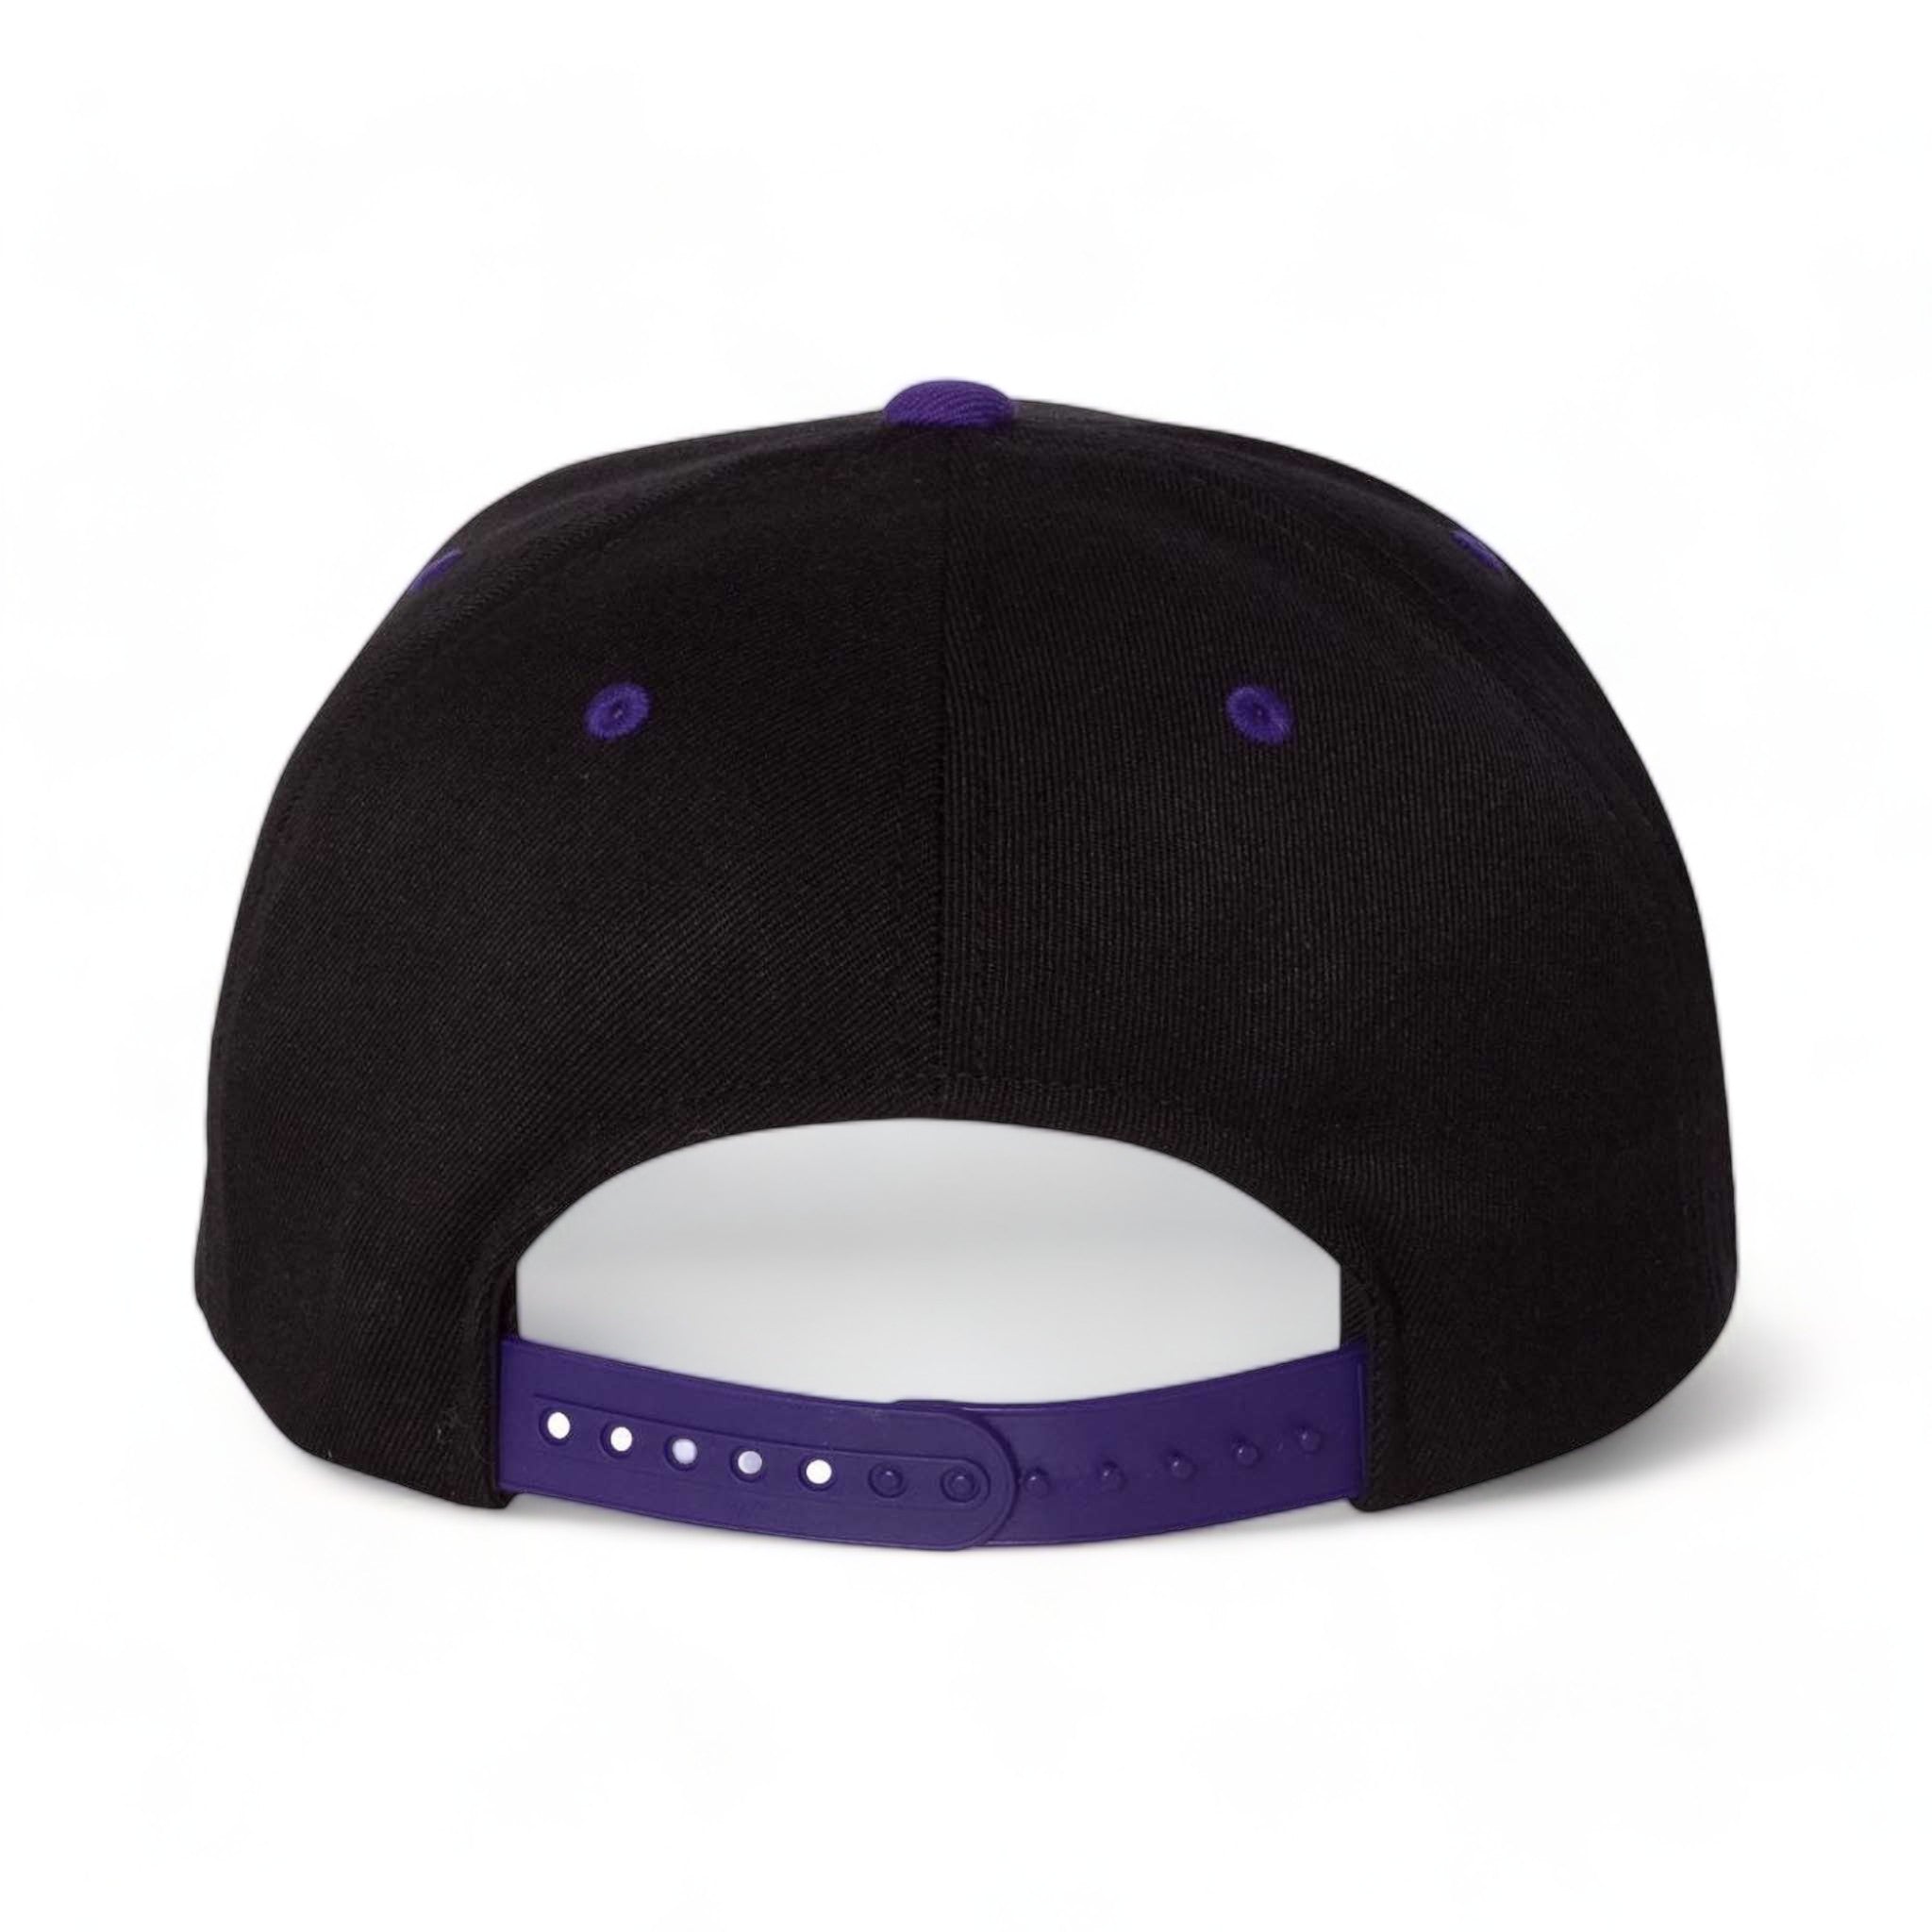 Back view of Flexfit 110F custom hat in black and purple